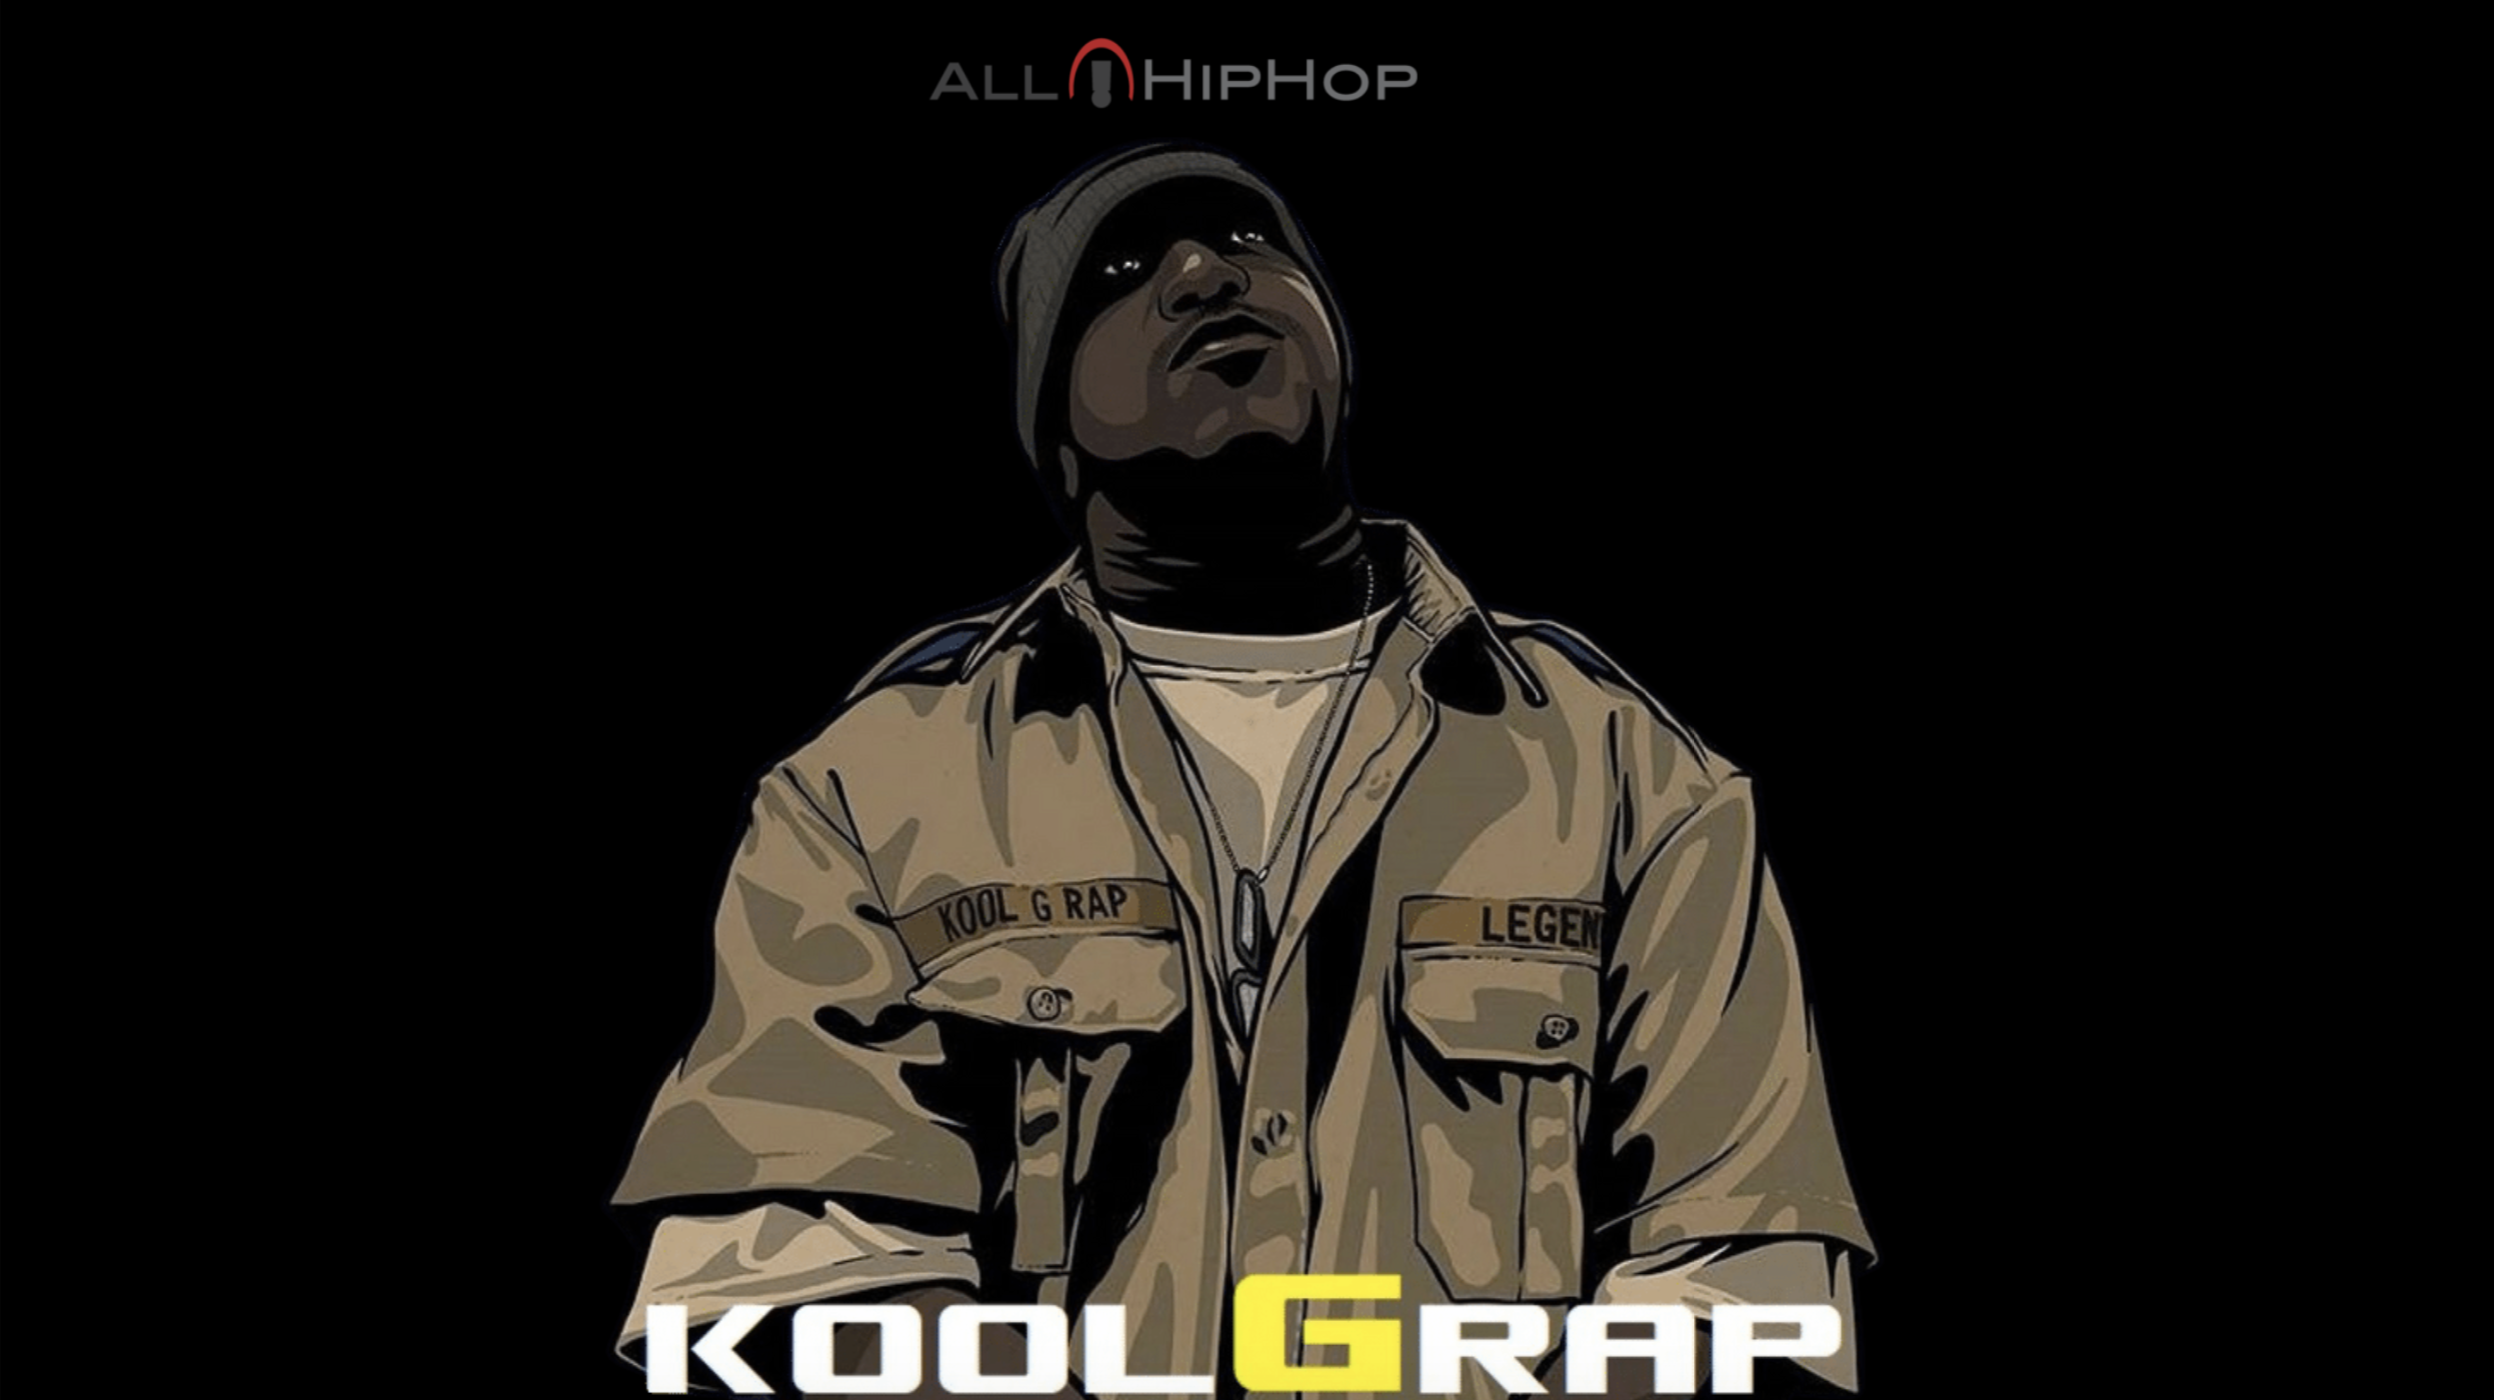 Kool G Rap's Next Project Is Going To Be Fire - AllHipHop